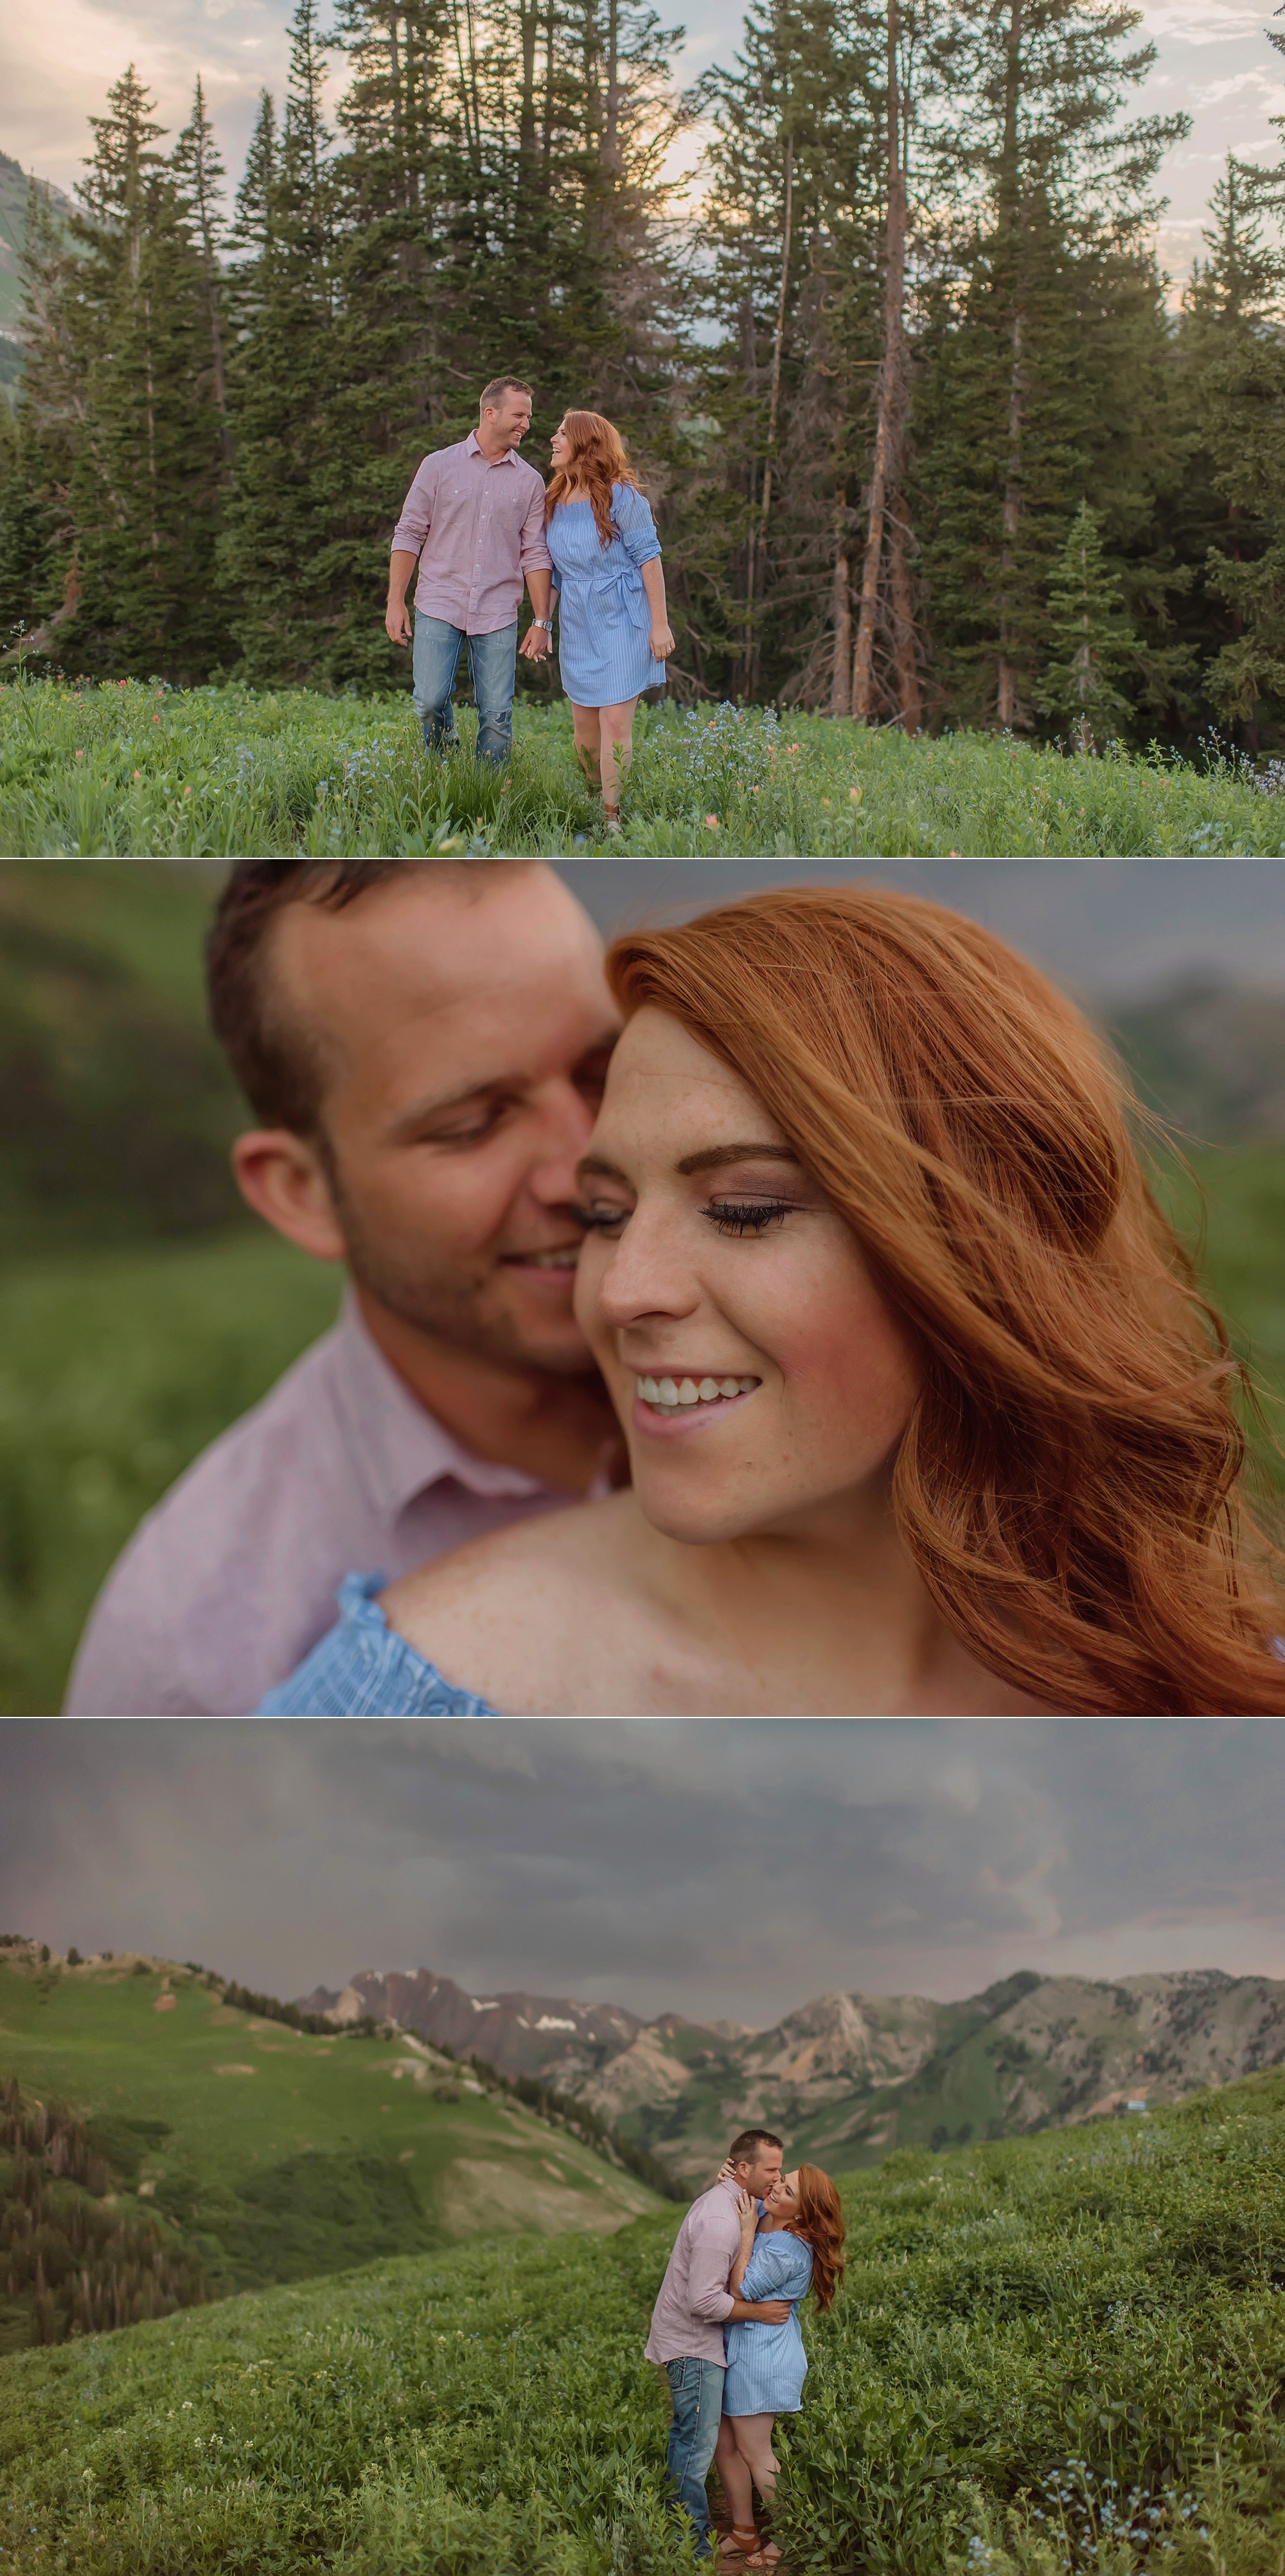 Brody and Sydnie engagements – Albion Basin